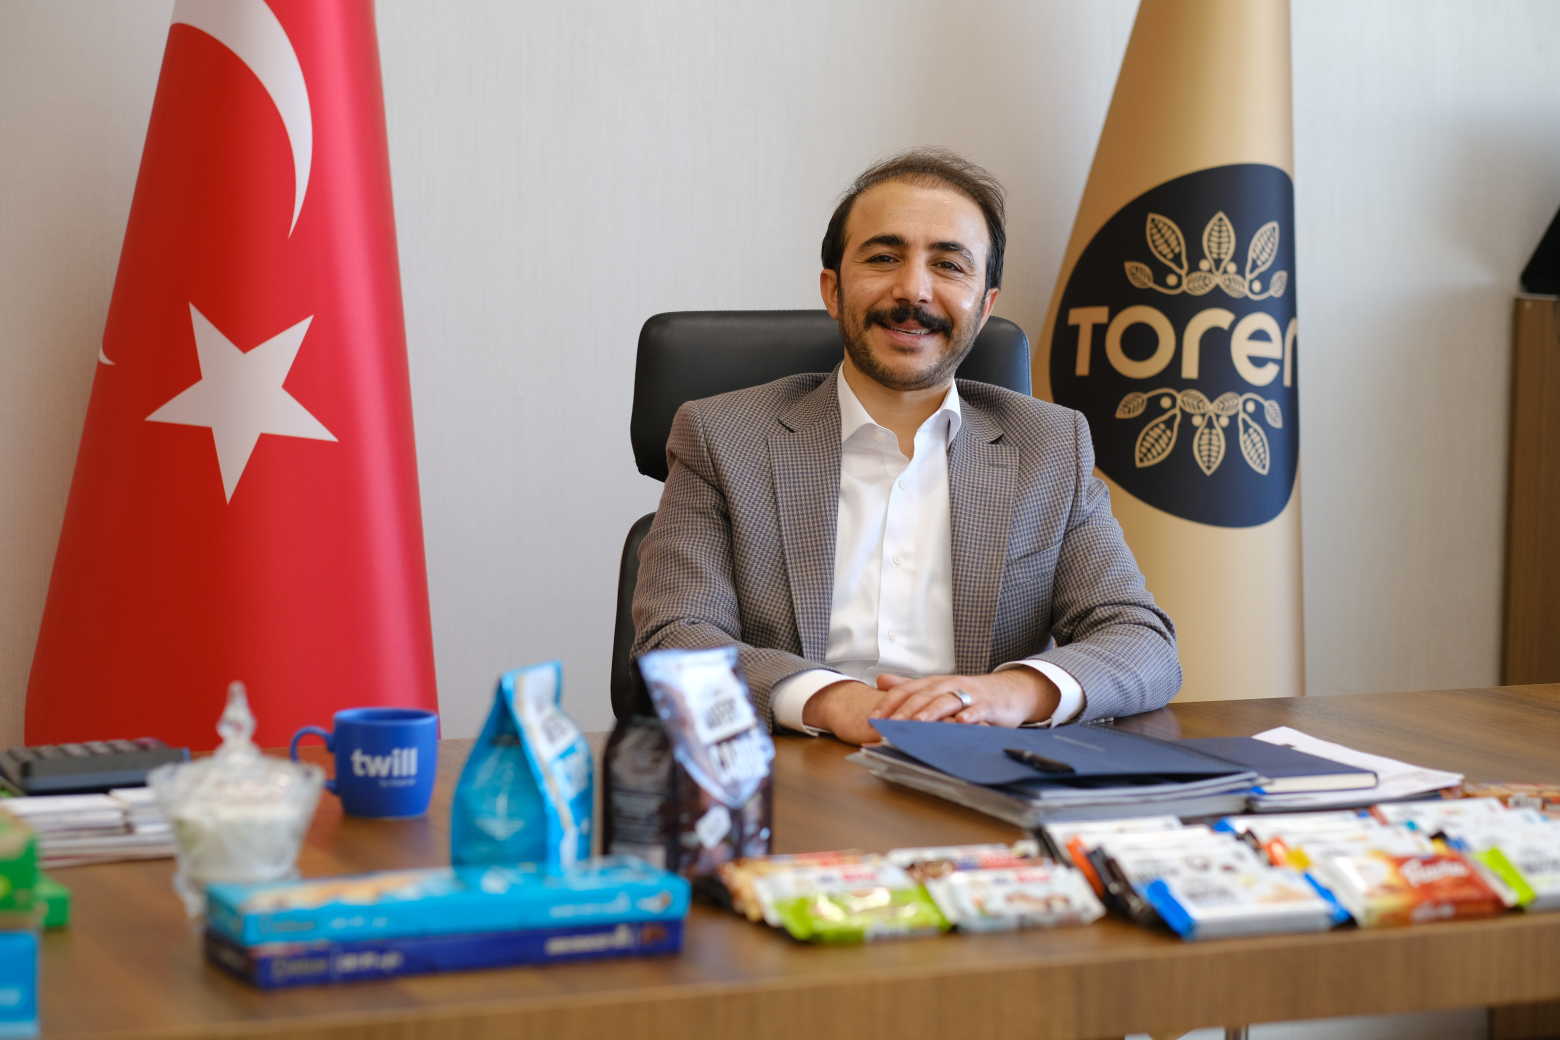 Vice Chairman of the Management Board at Toren Gıda